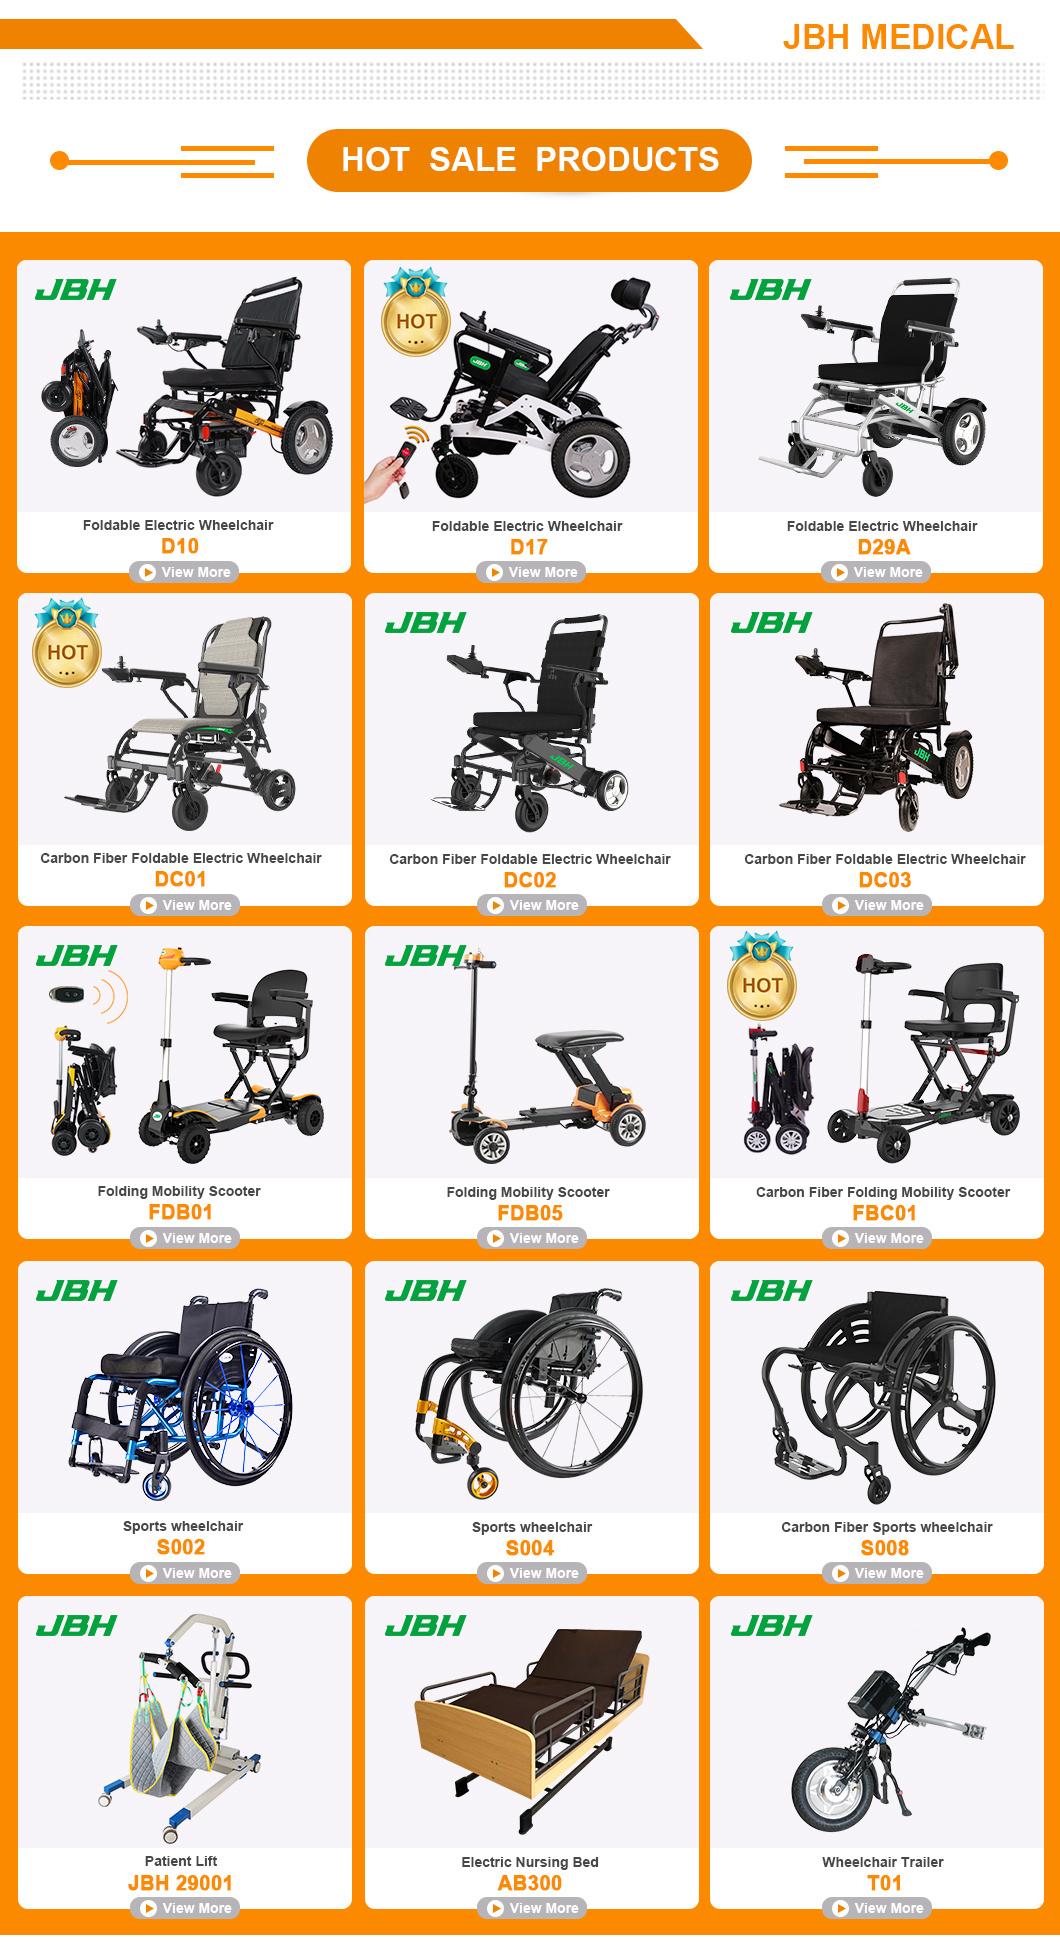 Luxurious electric Mobility Standing Wheelchair Jbh Medical